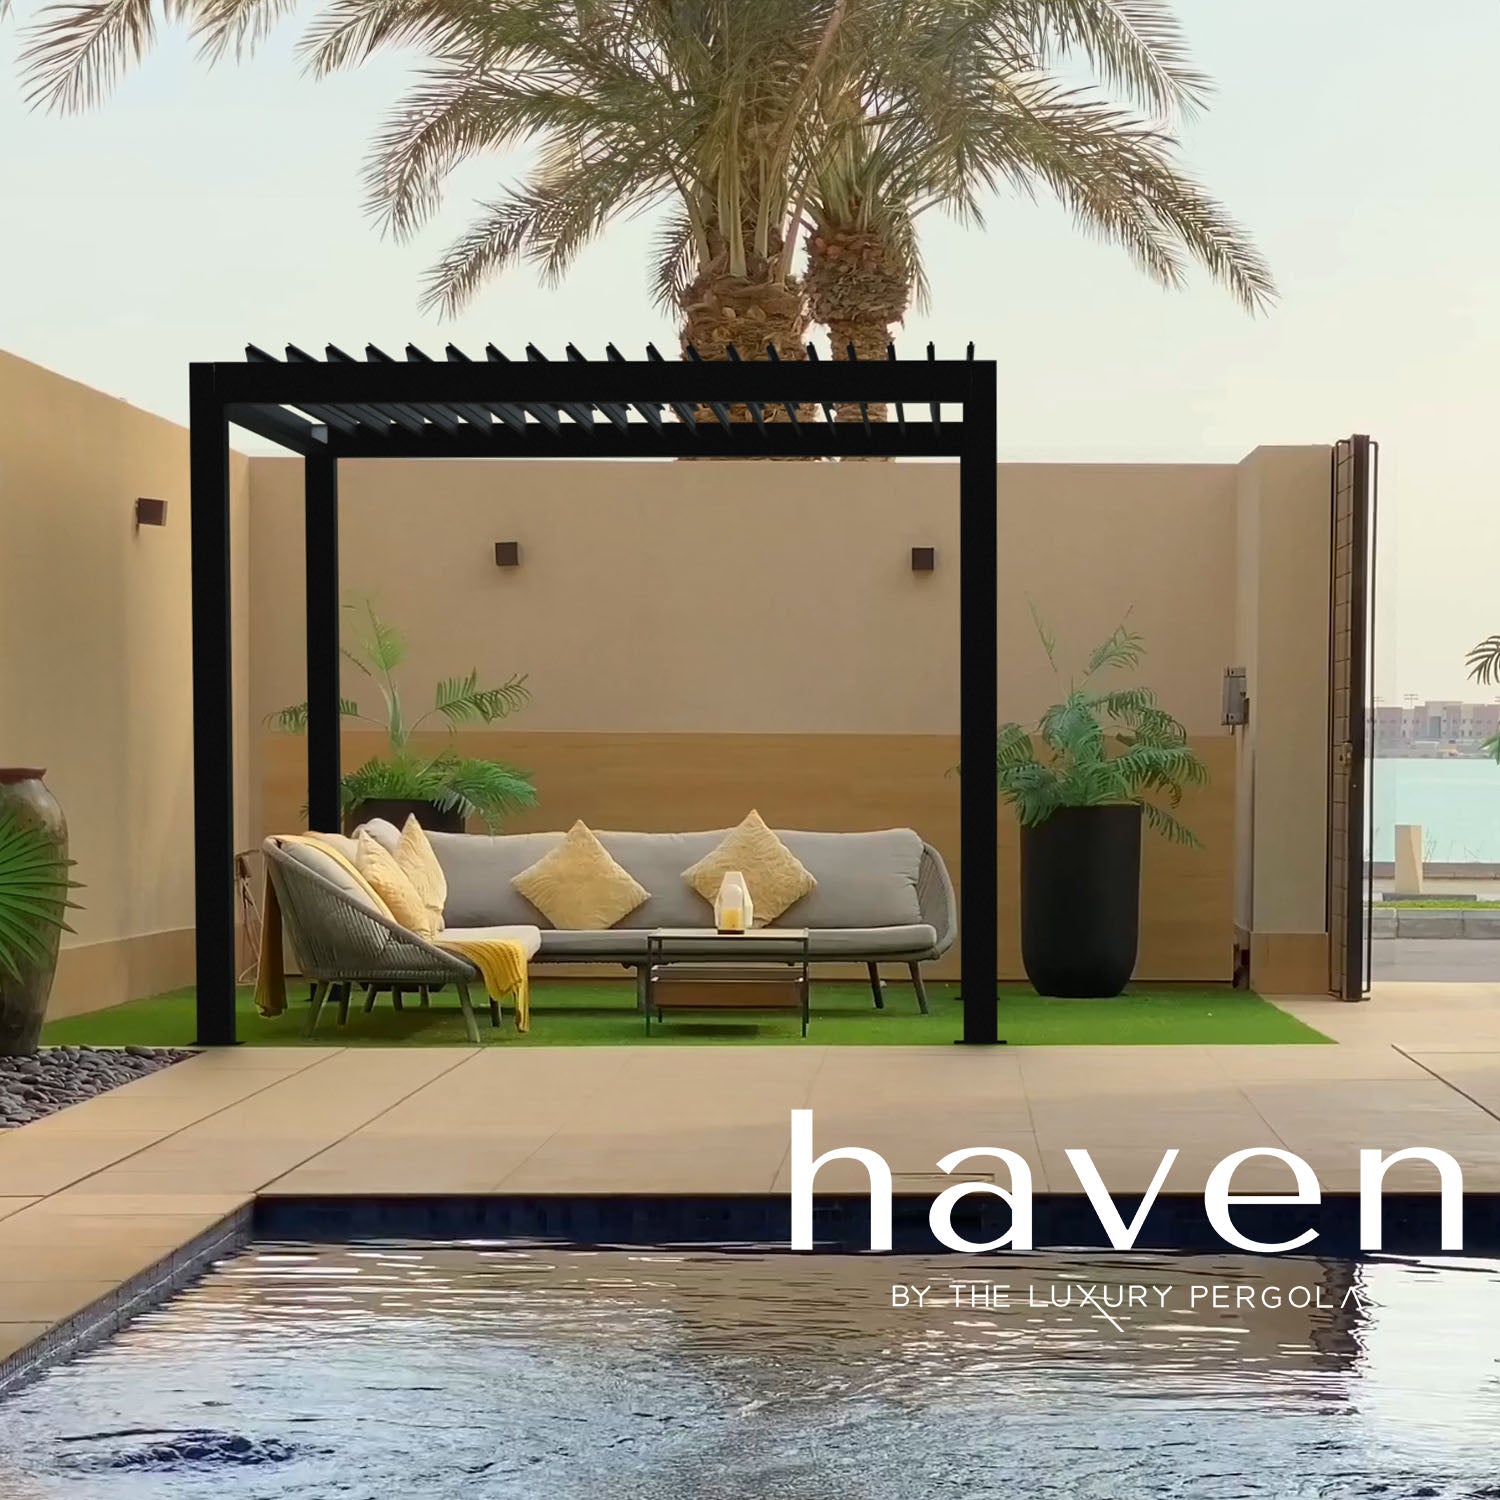 Haven Aluminum Pergola by a pool and beach